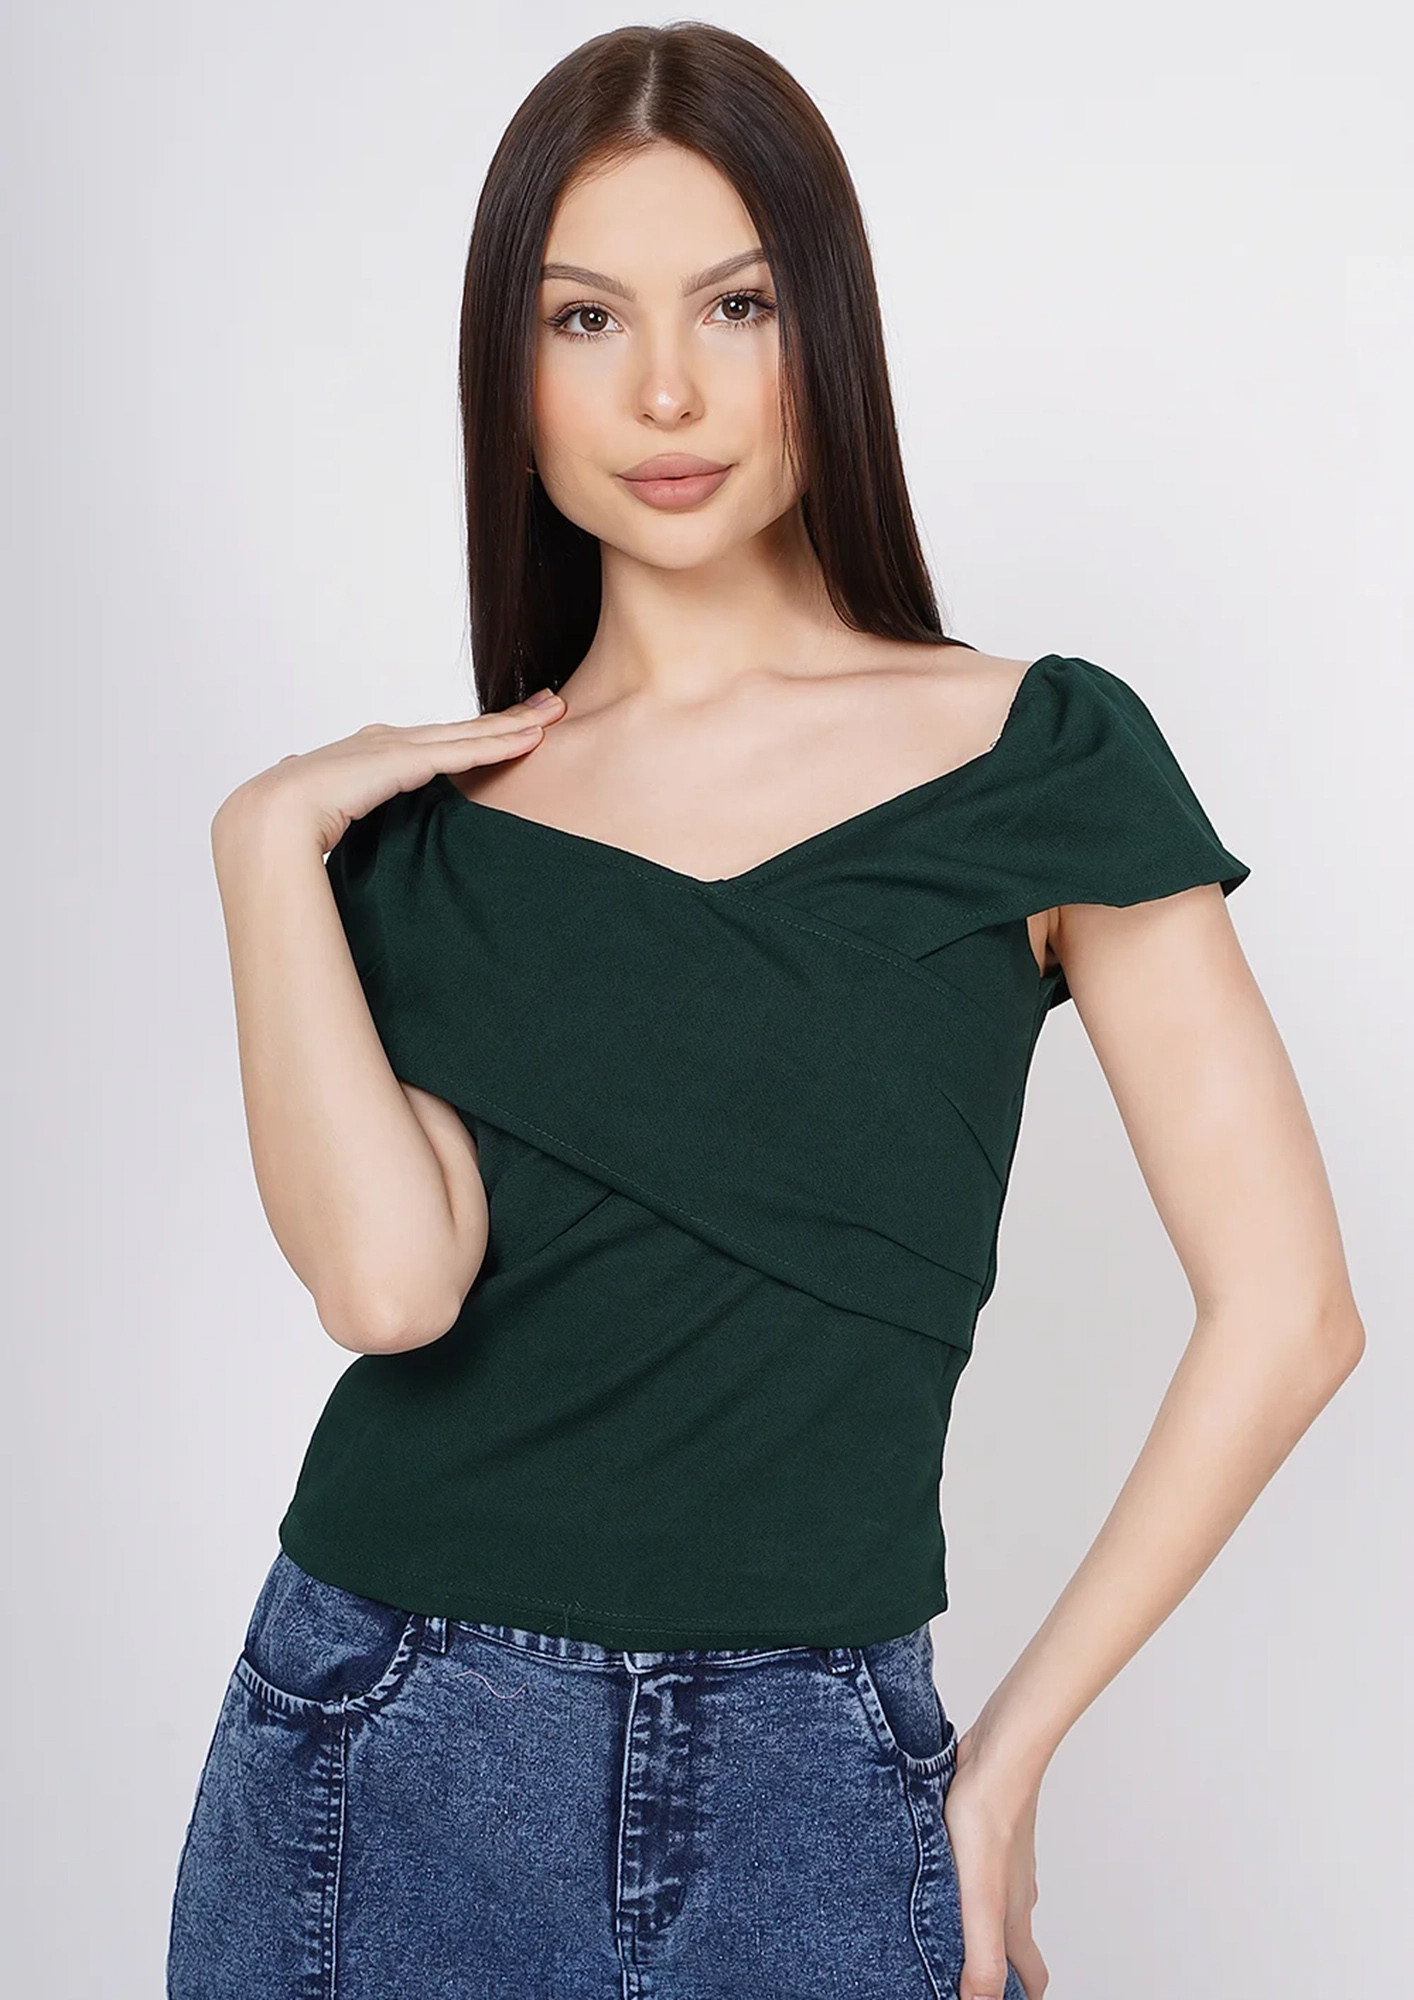 TAGGD Broad Neck Green Top